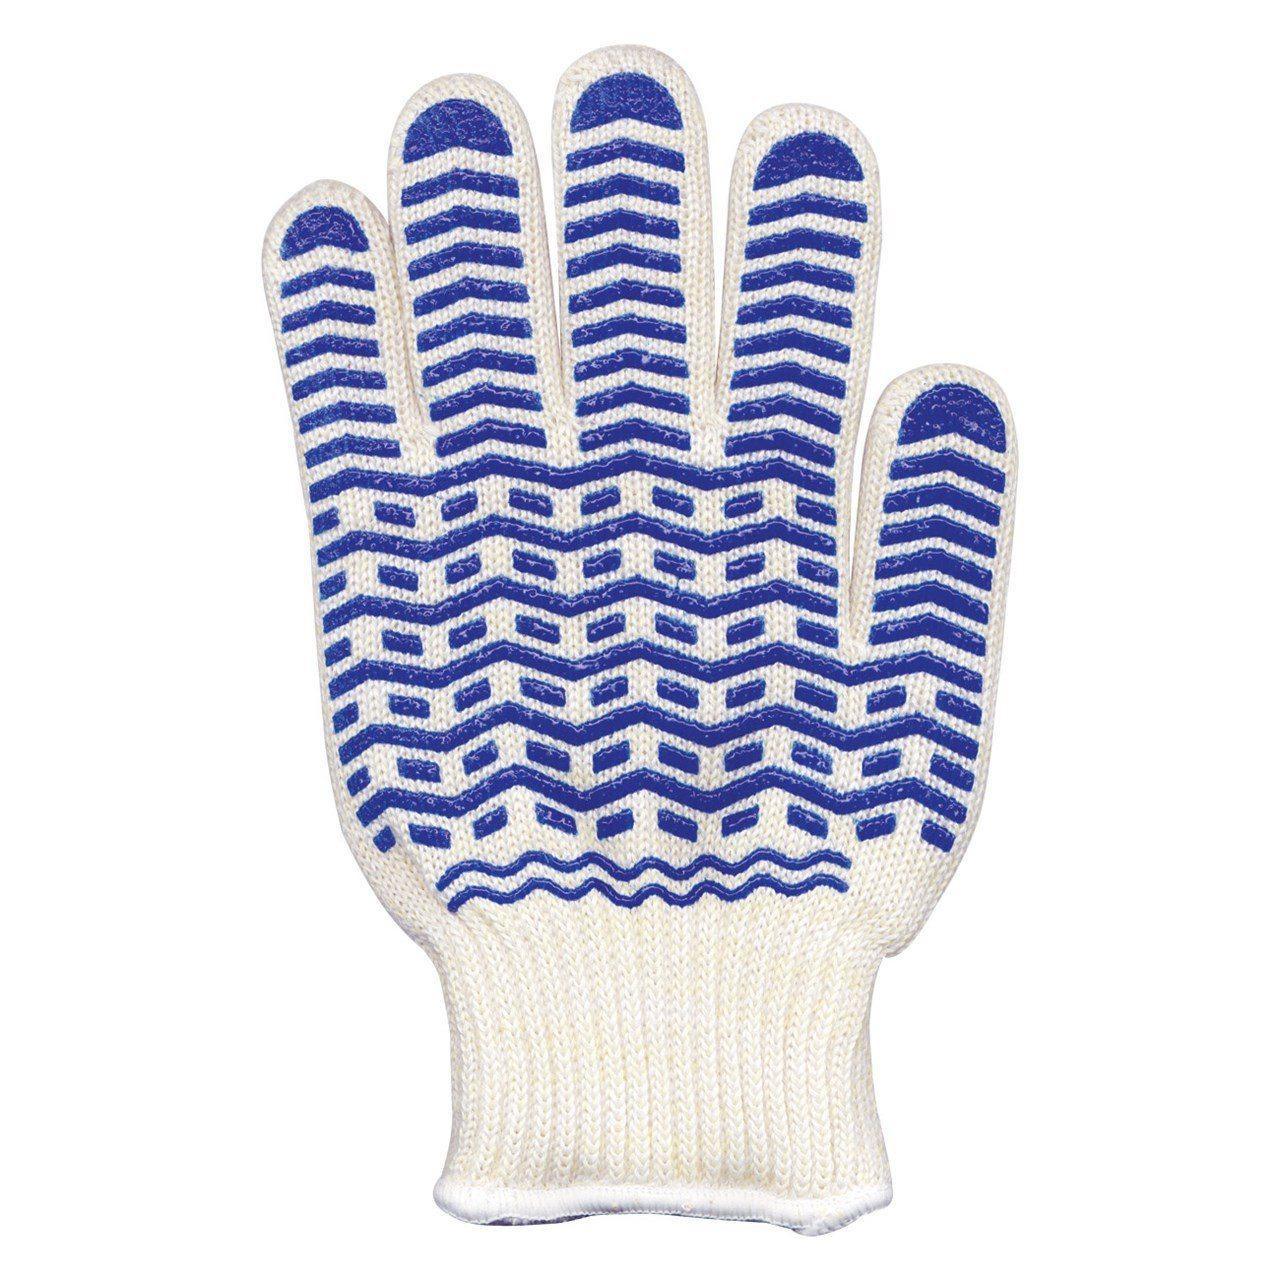 Oven Glove with Non-Slip Silicone Grip-One Glove - The Low Vision Store